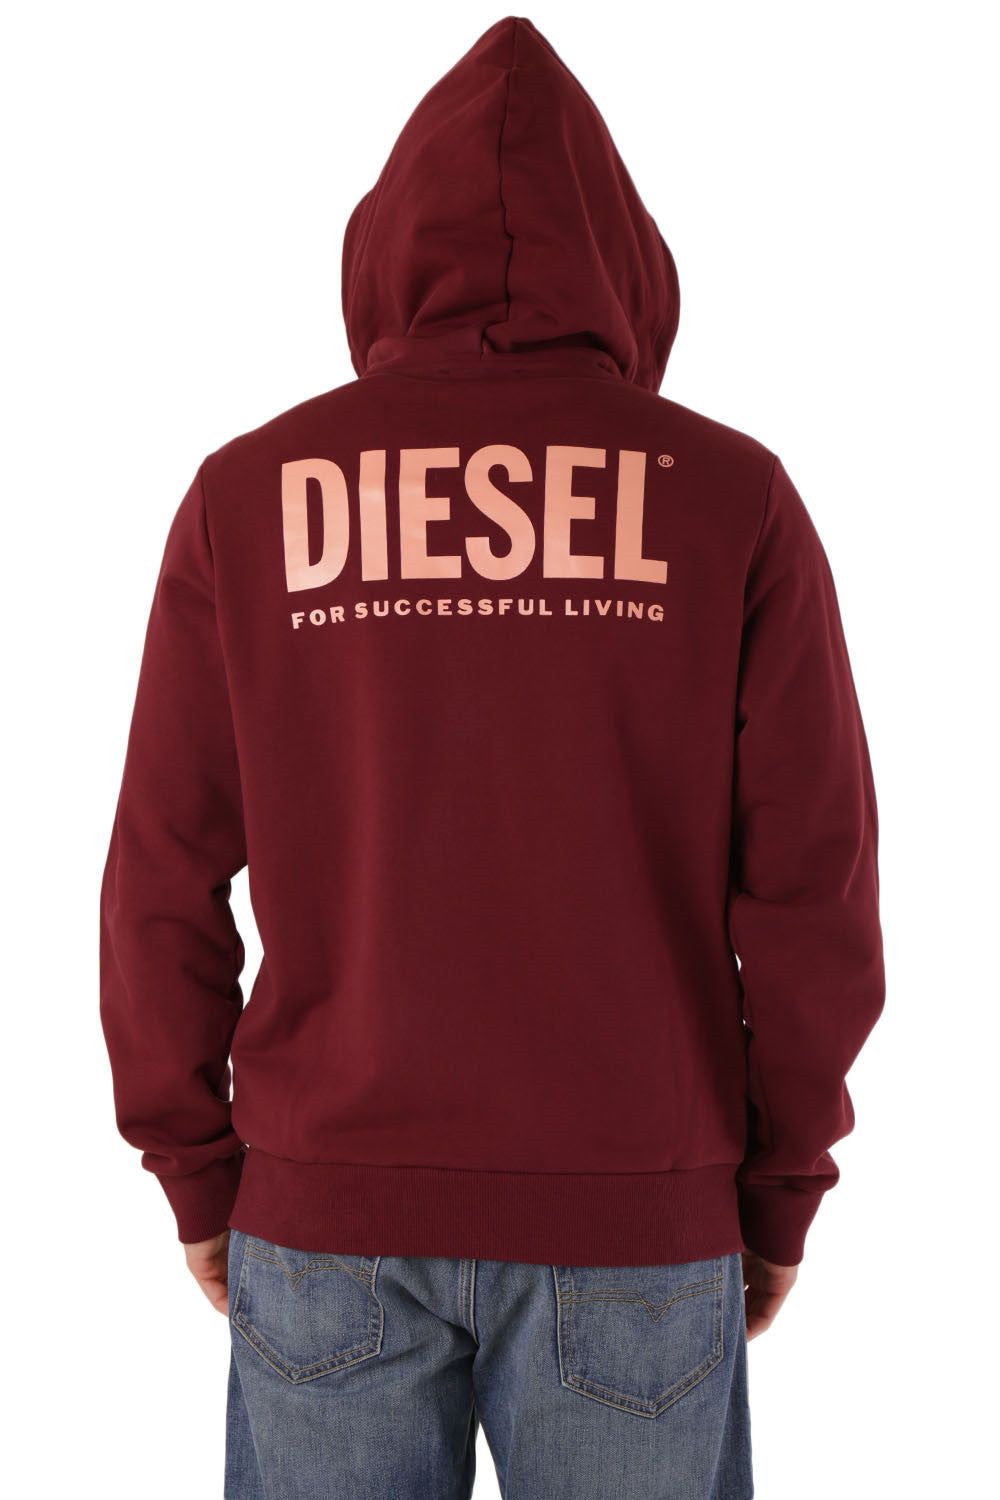 Brand: Diesel
Gender: Men
Type: Sweatshirts
Season: All seasons

PRODUCT DETAIL
• Color: green
• Fastening: with zip
• Sleeves: long
• Collar: hood

COMPOSITION AND MATERIAL
• Composition: -95% cotton 
•  Washing: machine wash at 30°